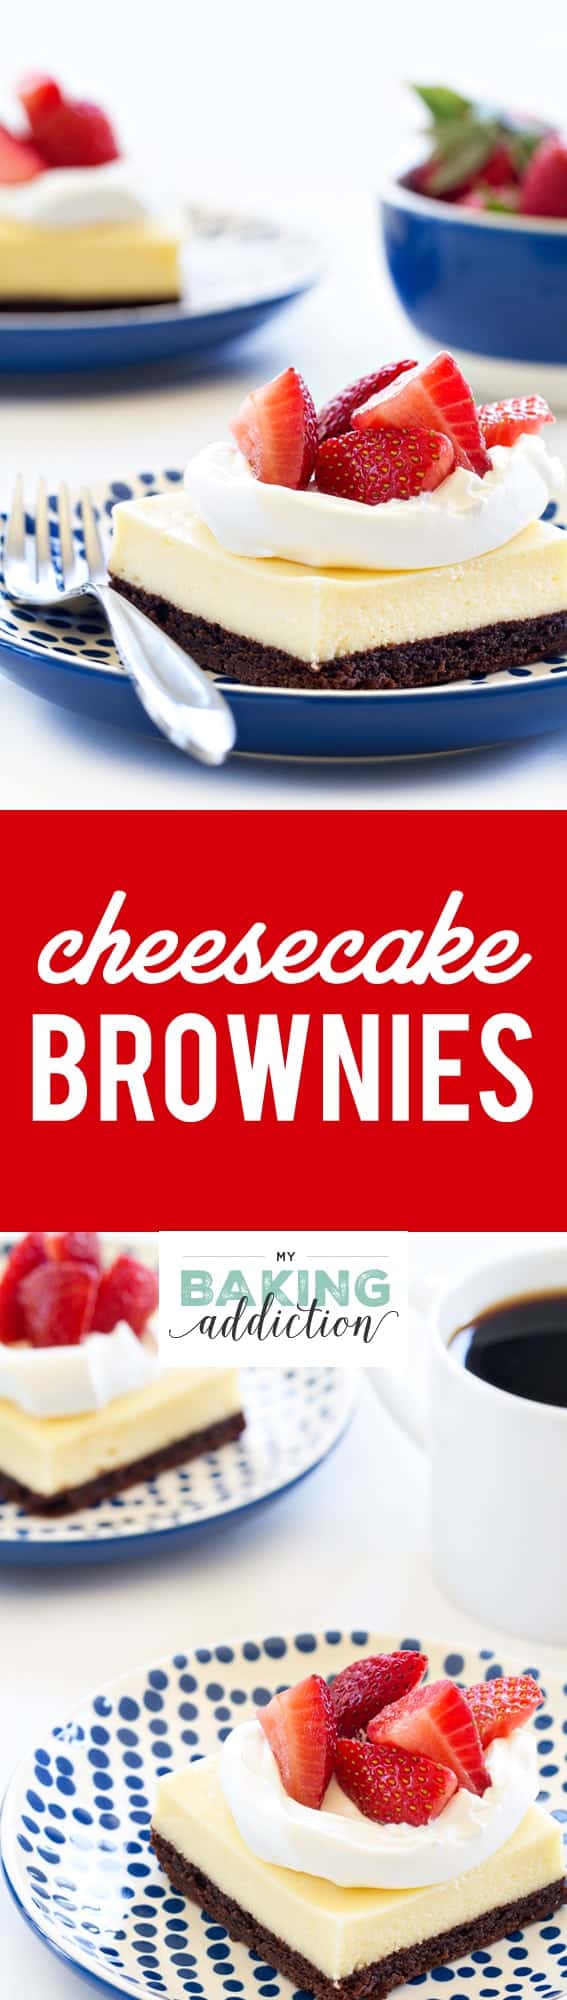 Cheesecake Brownies are everything you love about cheesecake, but with a fudgy brownie bottom. Serve them with fresh berries for a truly beautiful and delicious dessert. 